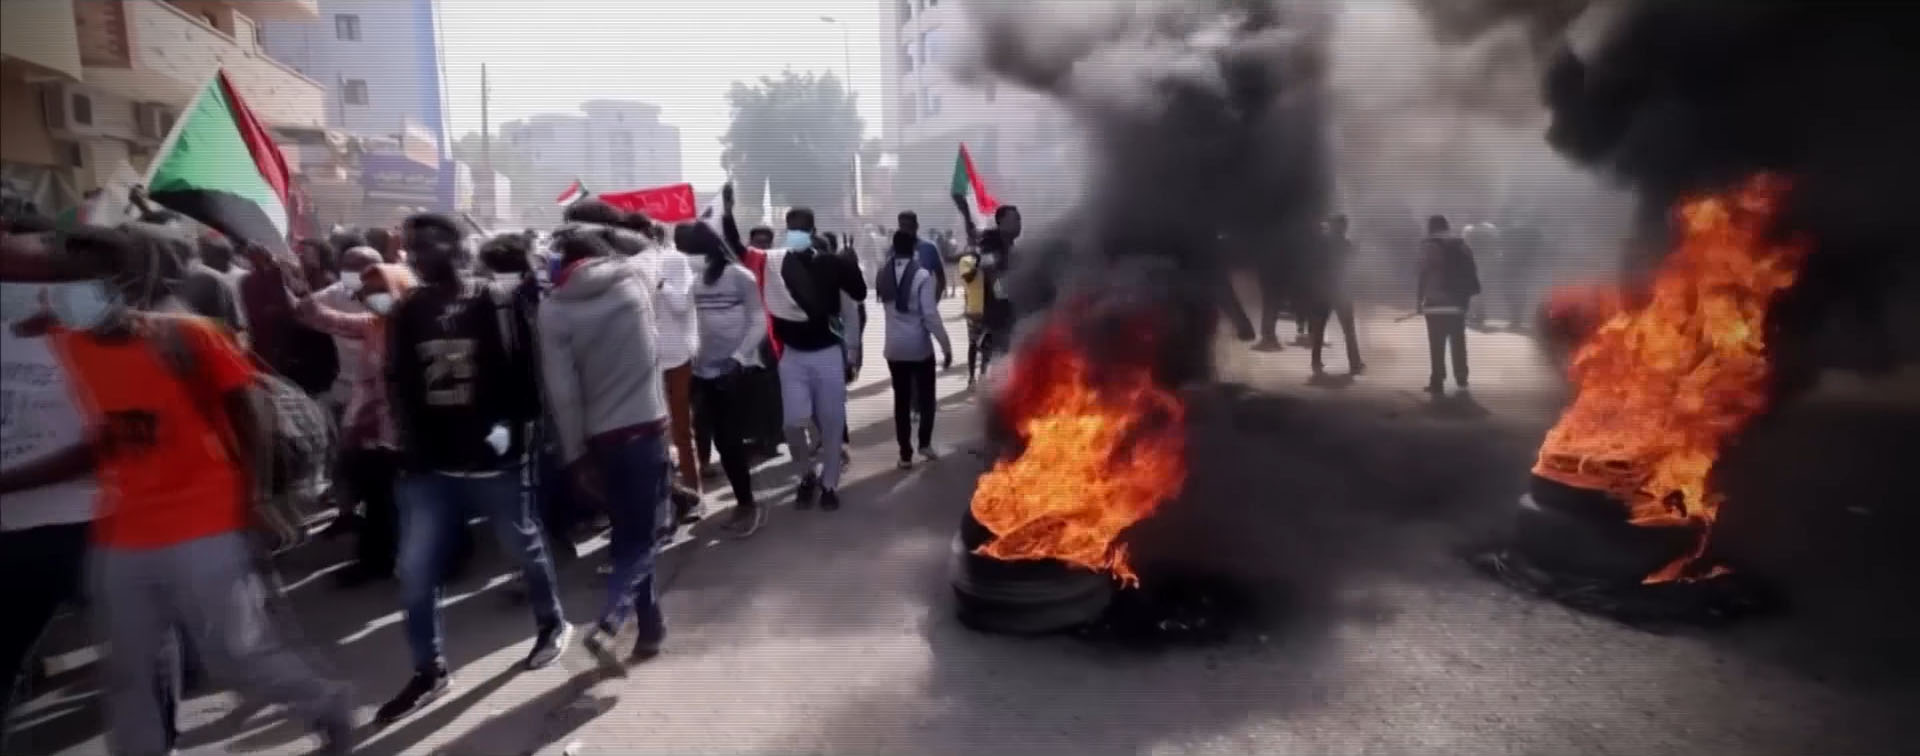 Protesters in Sudan carrying their country's flags and burning tires